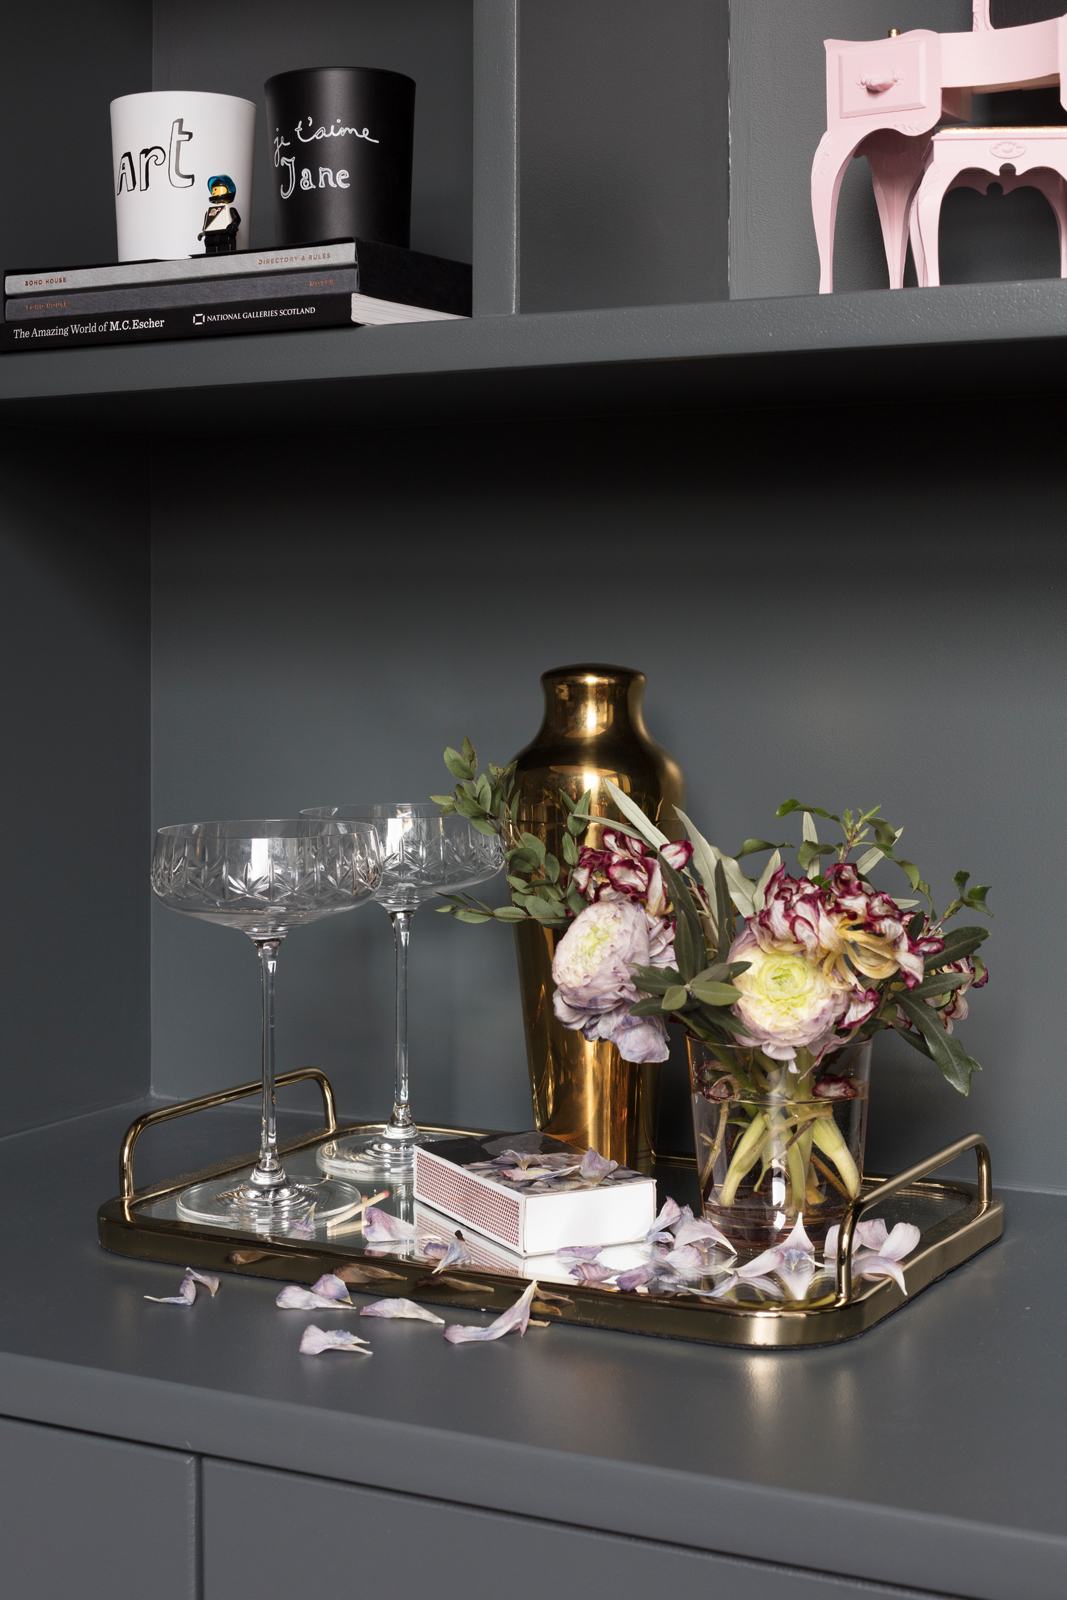 Mirrored drinks tray from Marks & Spencer